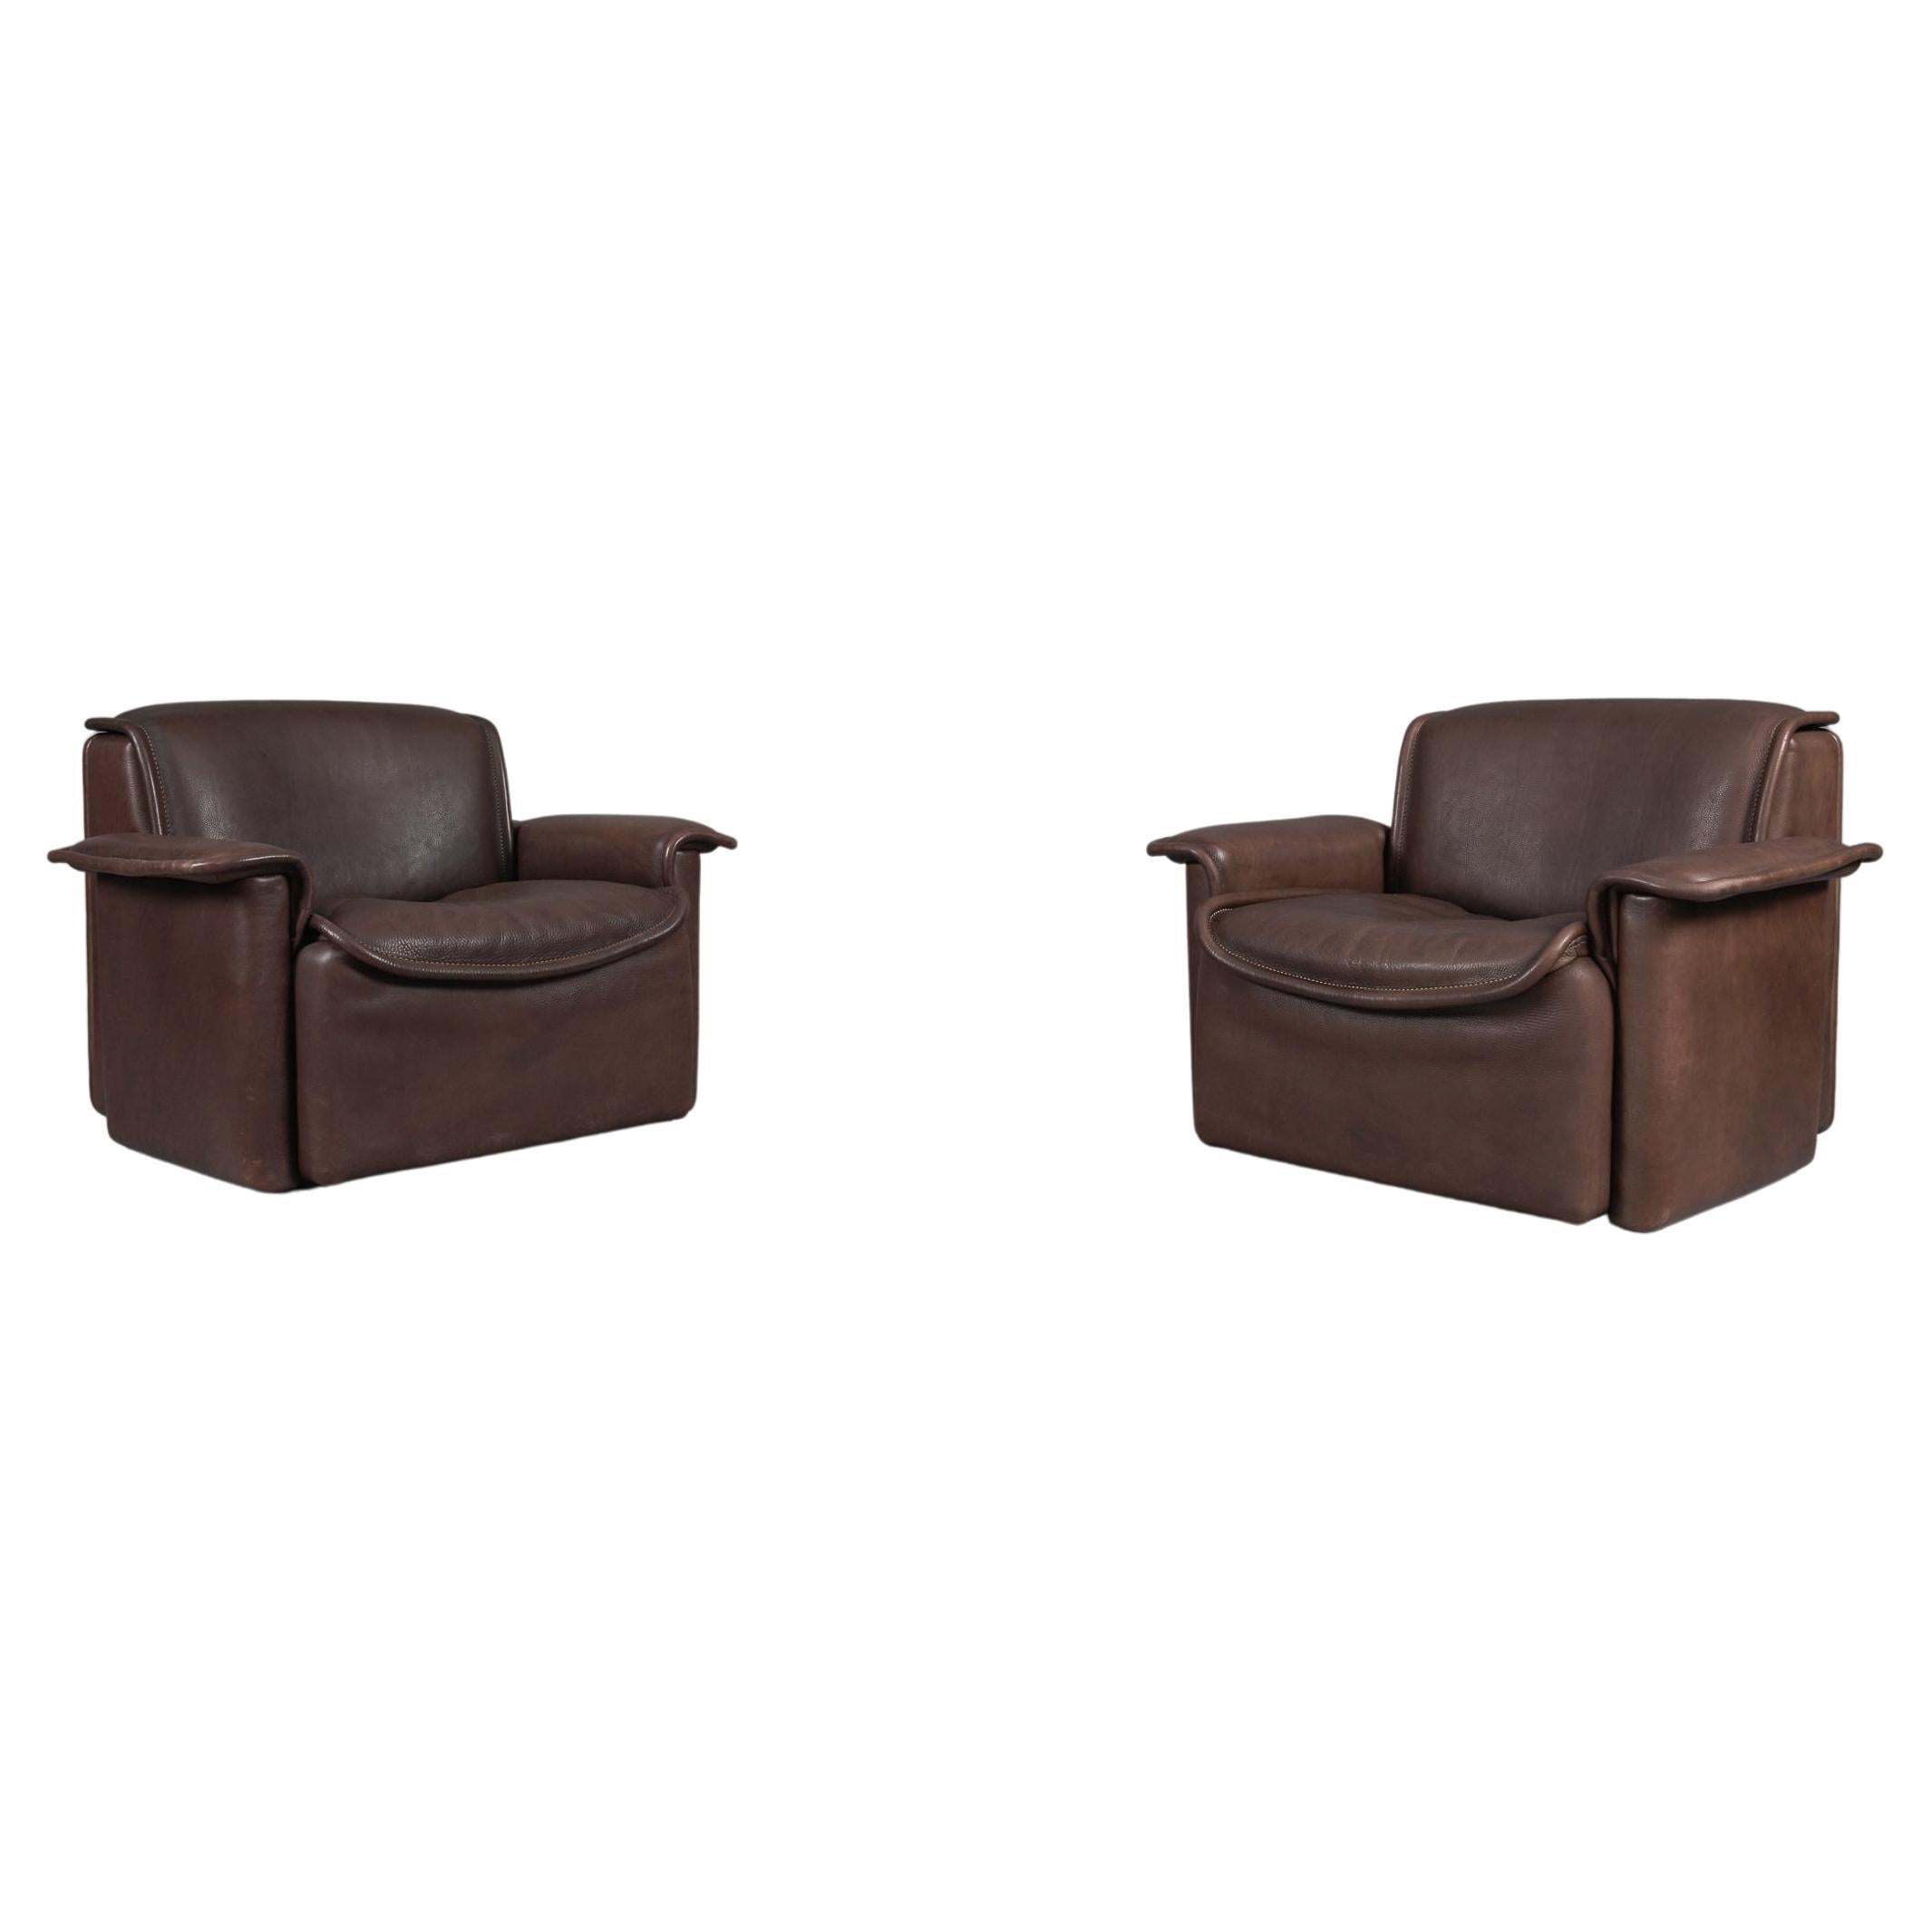 Two Armchairs by De Sede DS-12 in Brown Neck Leather, 1960s, Switzerland For Sale